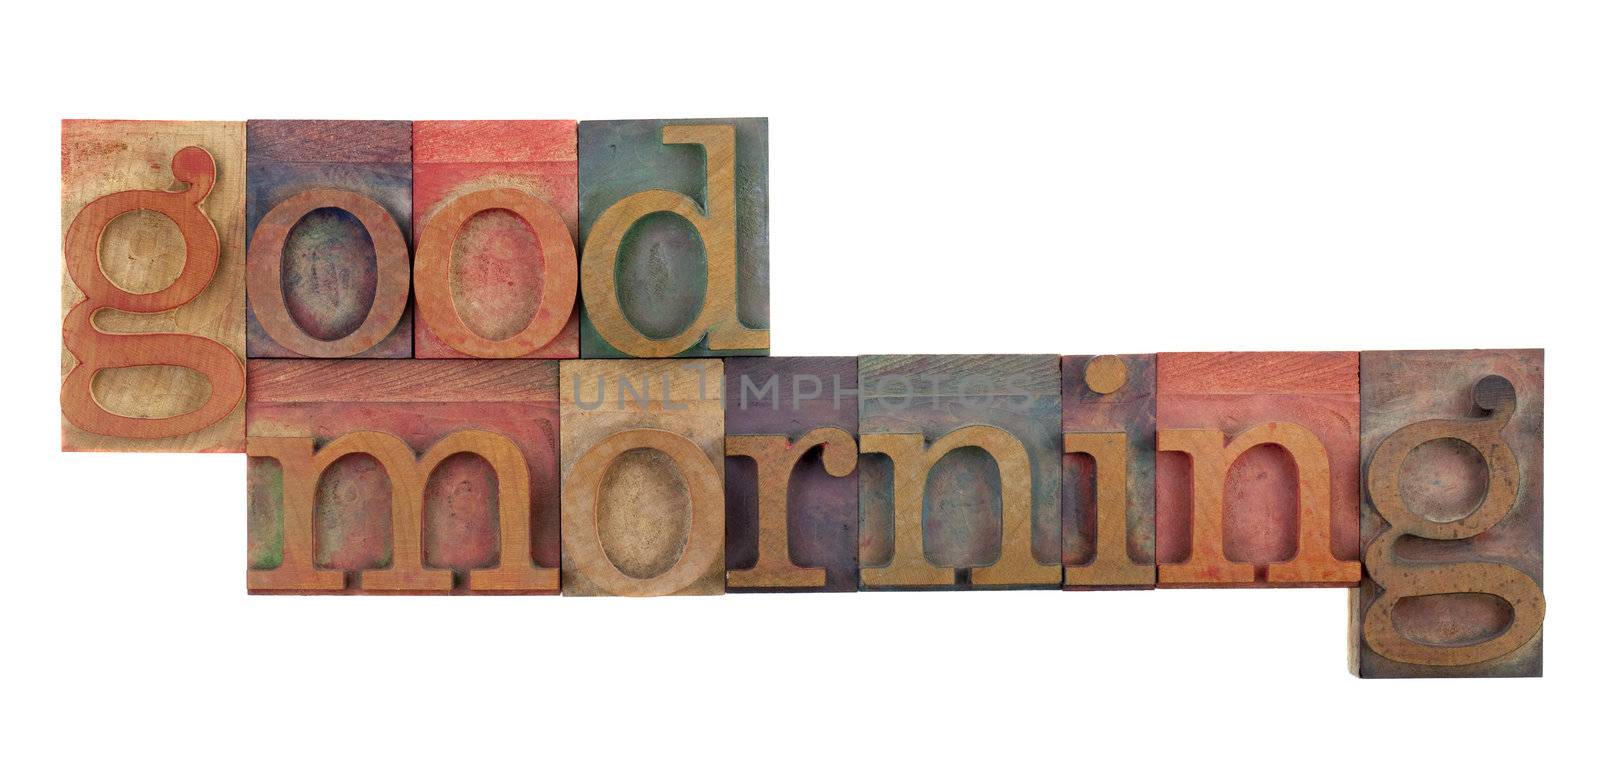 good morning greeting in vintage wood letterpress type blocks, stained by color ink, isolated on white